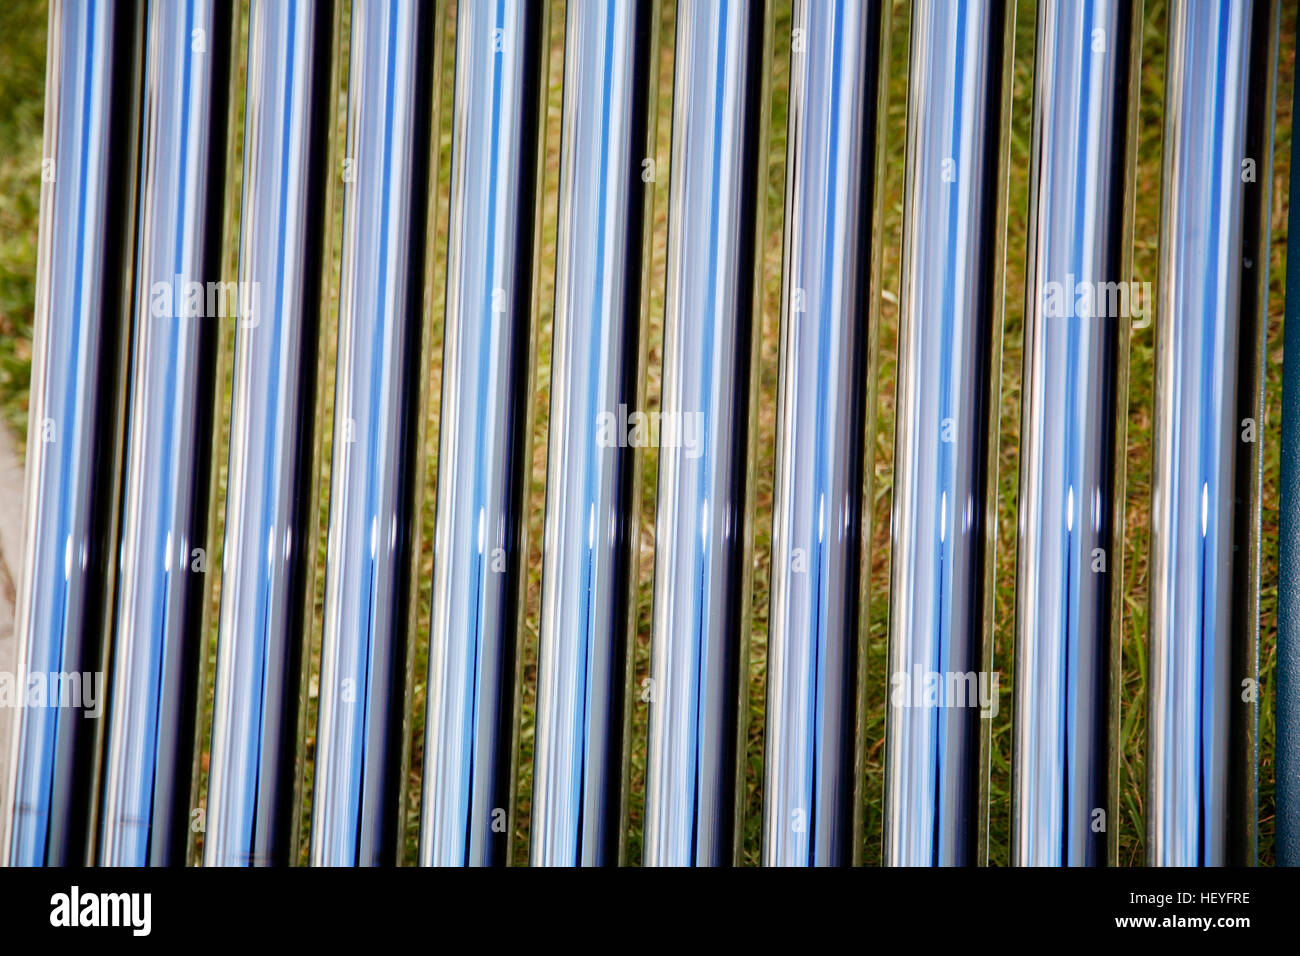 Elements of solar heating system. Details of evacuated tube solar collector Stock Photo